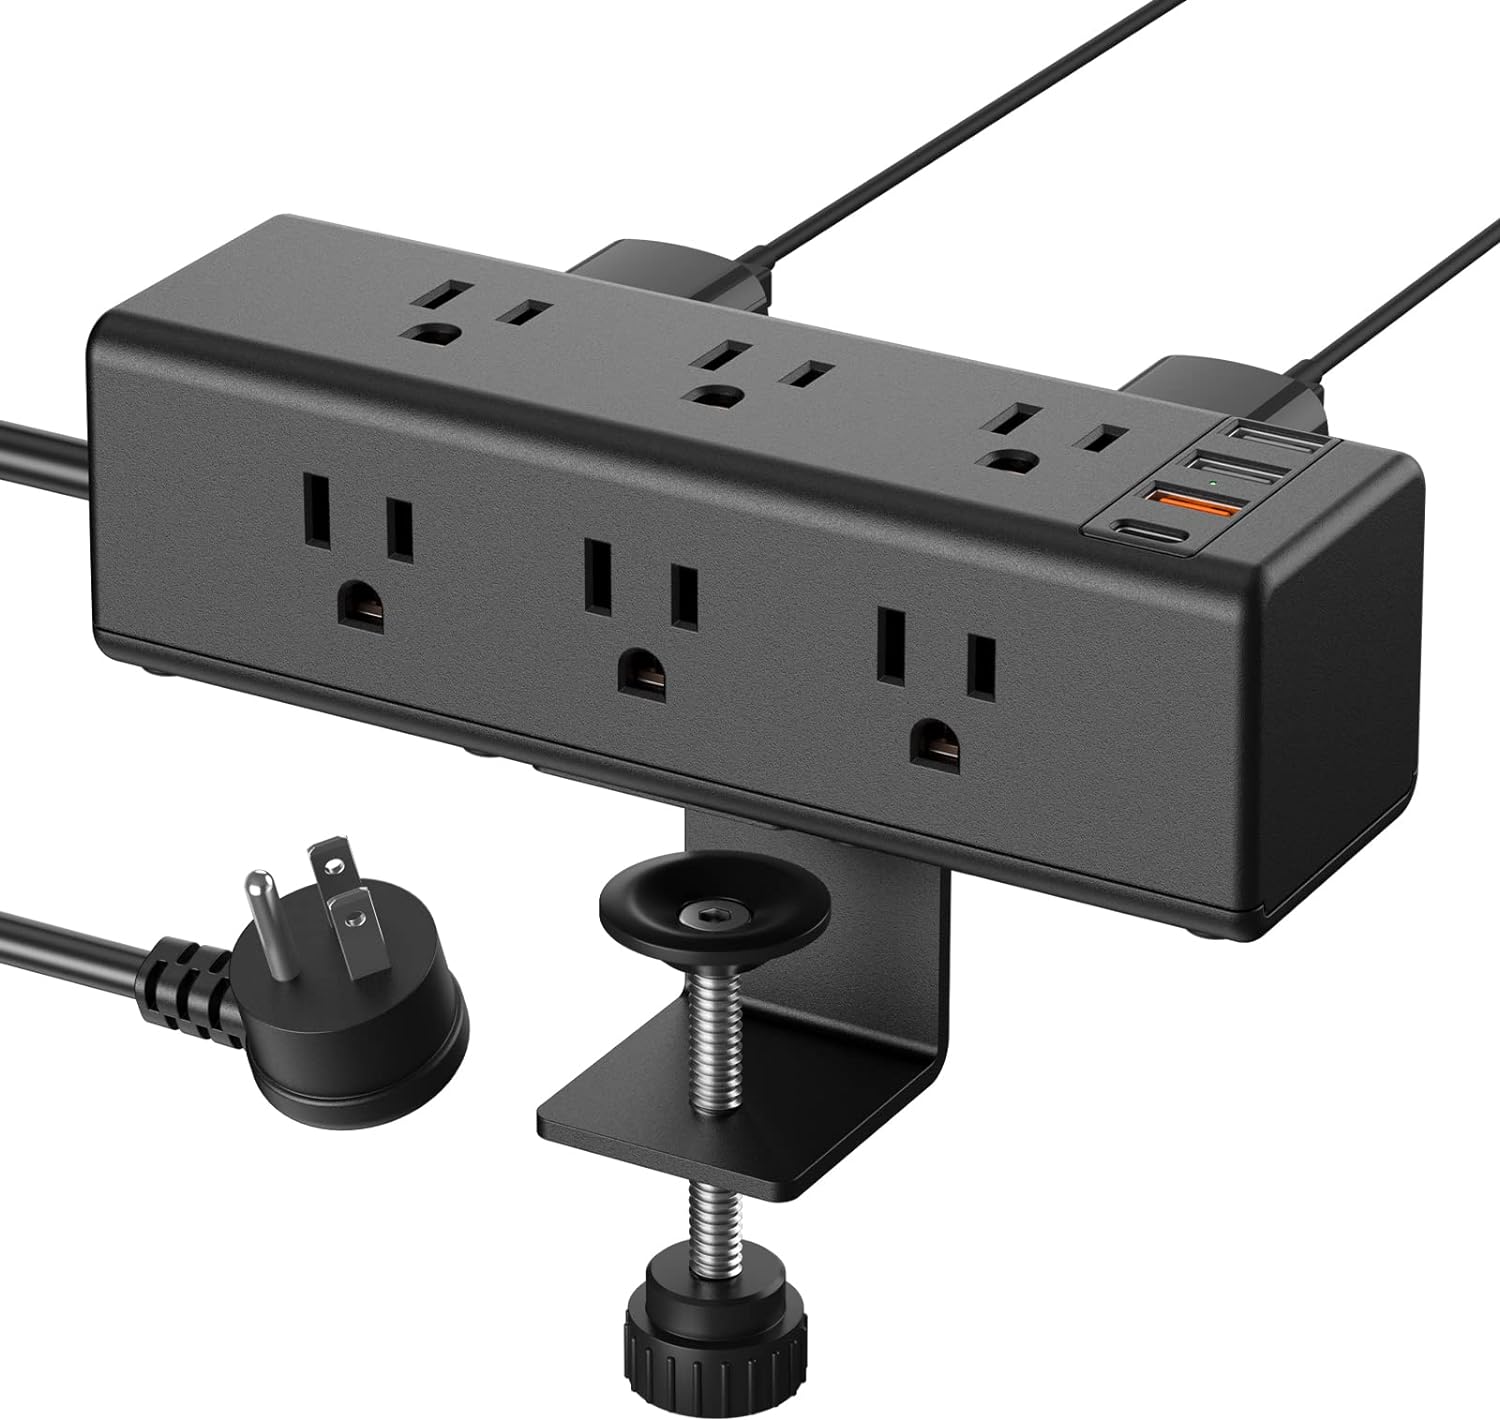 CCCEI Desk Clamp Power Strip with 9 Outlets, Desktop Edge Mount Surge Protector with USB-A and USB-C Ports, Widely Spaced Desk Outlet Fast Charging Station, 6 FT Flat Plug, Fit 1.6 inch Table.